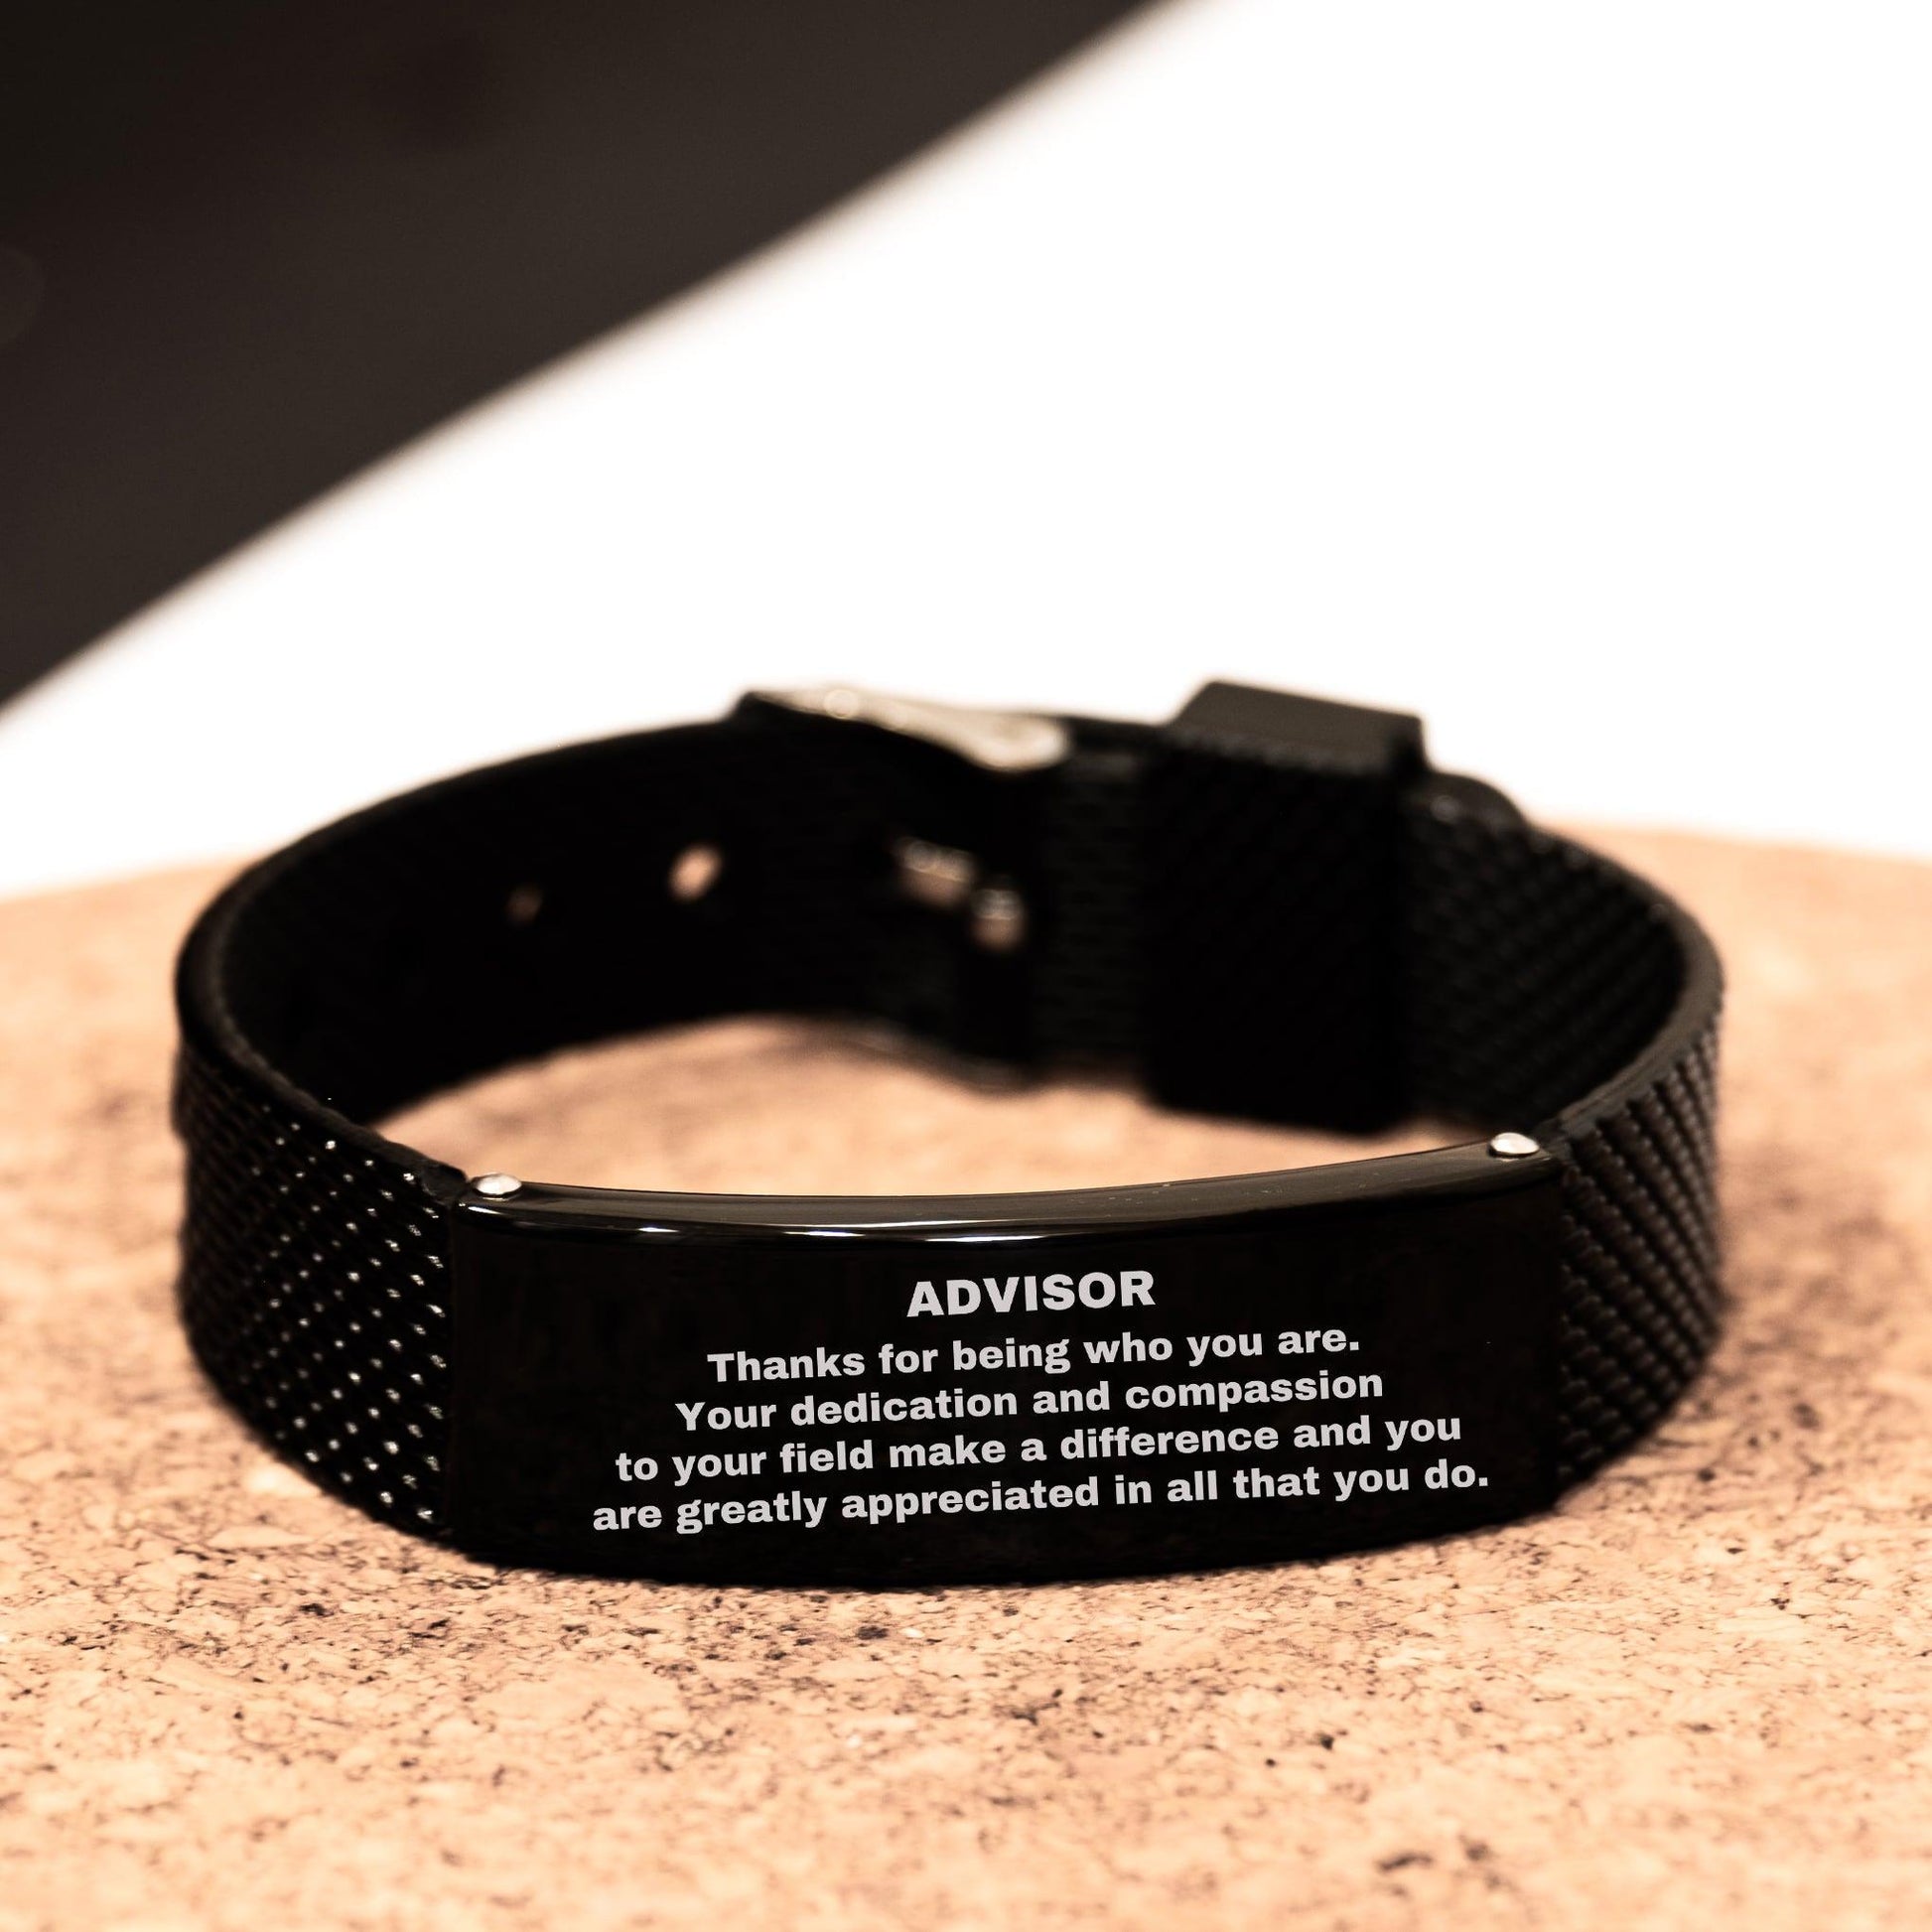 Advisor Black Shark Mesh Stainless Steel Engraved Bracelet - Thanks for being who you are - Birthday Christmas Jewelry Gifts Coworkers Colleague Boss - Mallard Moon Gift Shop